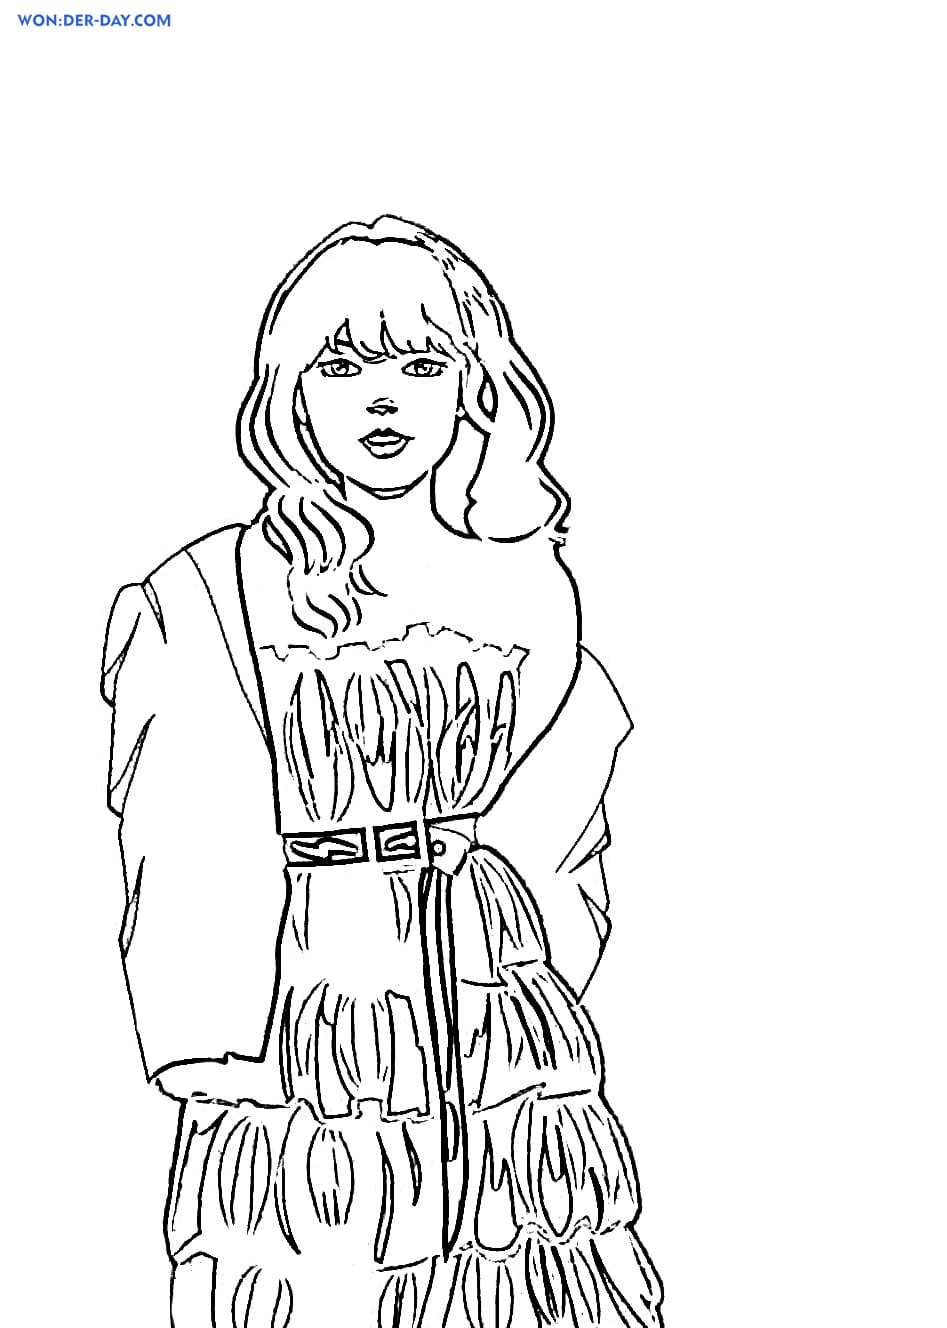 Taylor Swift Coloring Pages . Print for Free WONDER DAY — Coloring